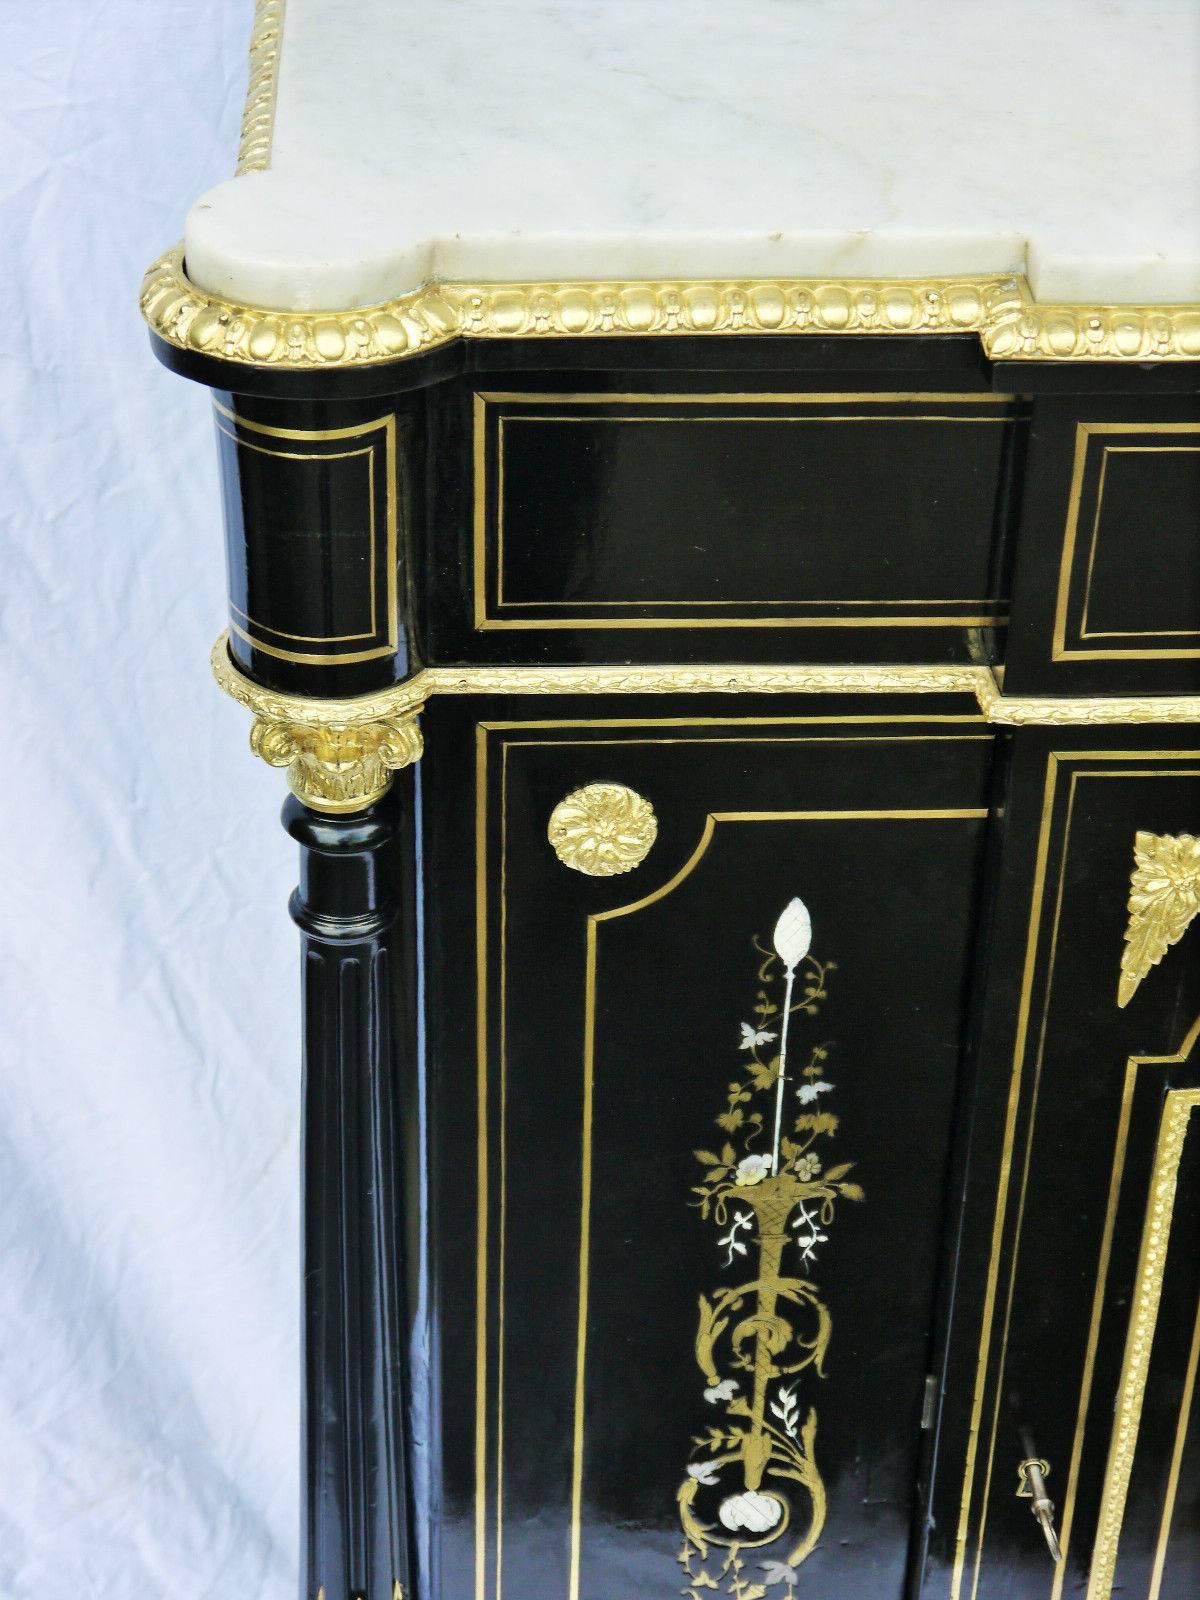 Beautiful cabinet (meuble d'appui) Napoleon III Boulle with nice marquetry inlays.
Threads and large front cartridges. Beautiful gilded bronze fittings, two interior shelves, Carrara marble on top
Period XIXth. Napoleon III (circa 1870). Elegantly